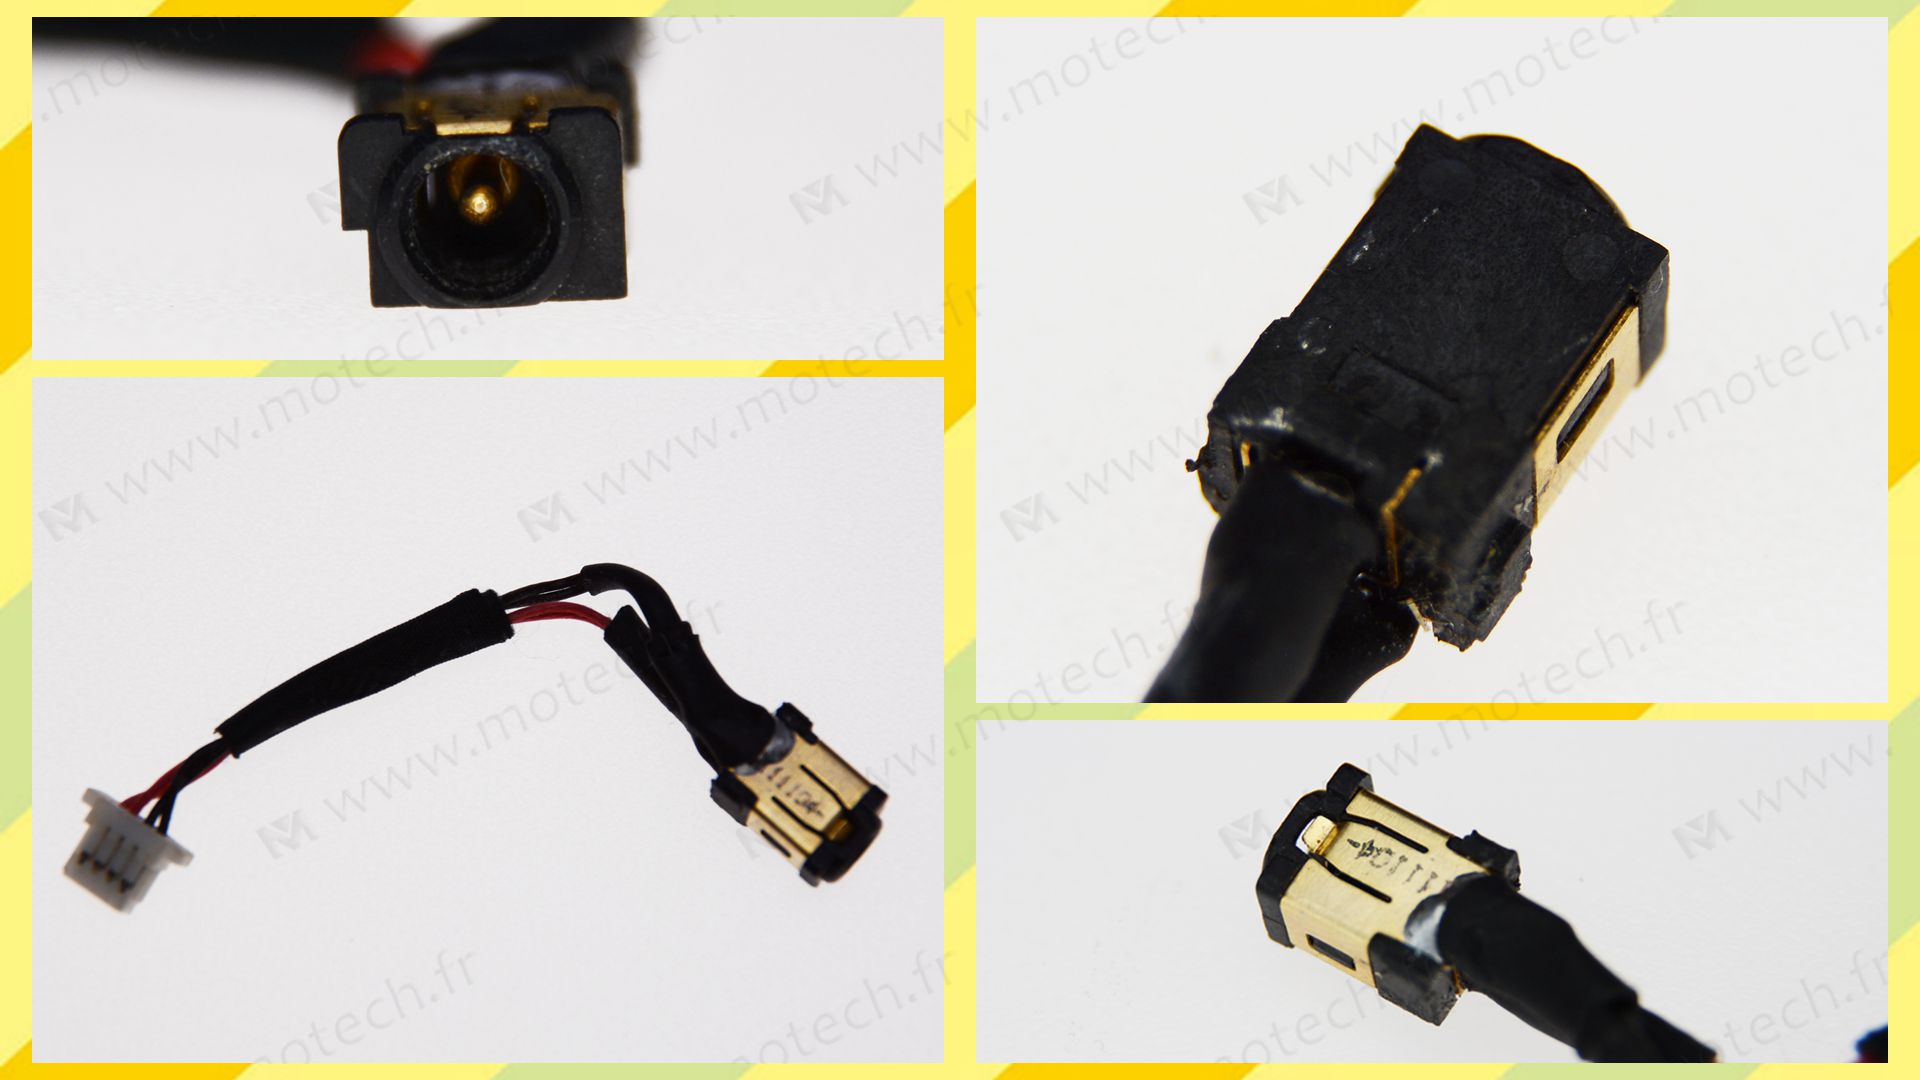 Acer S7-392 MS2364 charging connector, Acer S7-392 MS2364 DC Power Jack, Acer S7-392 MS2364 DC IN Cable, Acer S7-392 MS2364 Power Jack, Acer S7-392 MS2364 plug, Acer S7-392 MS2364 Jack socket, Acer S7-392 MS2364 connecteur de charge, 